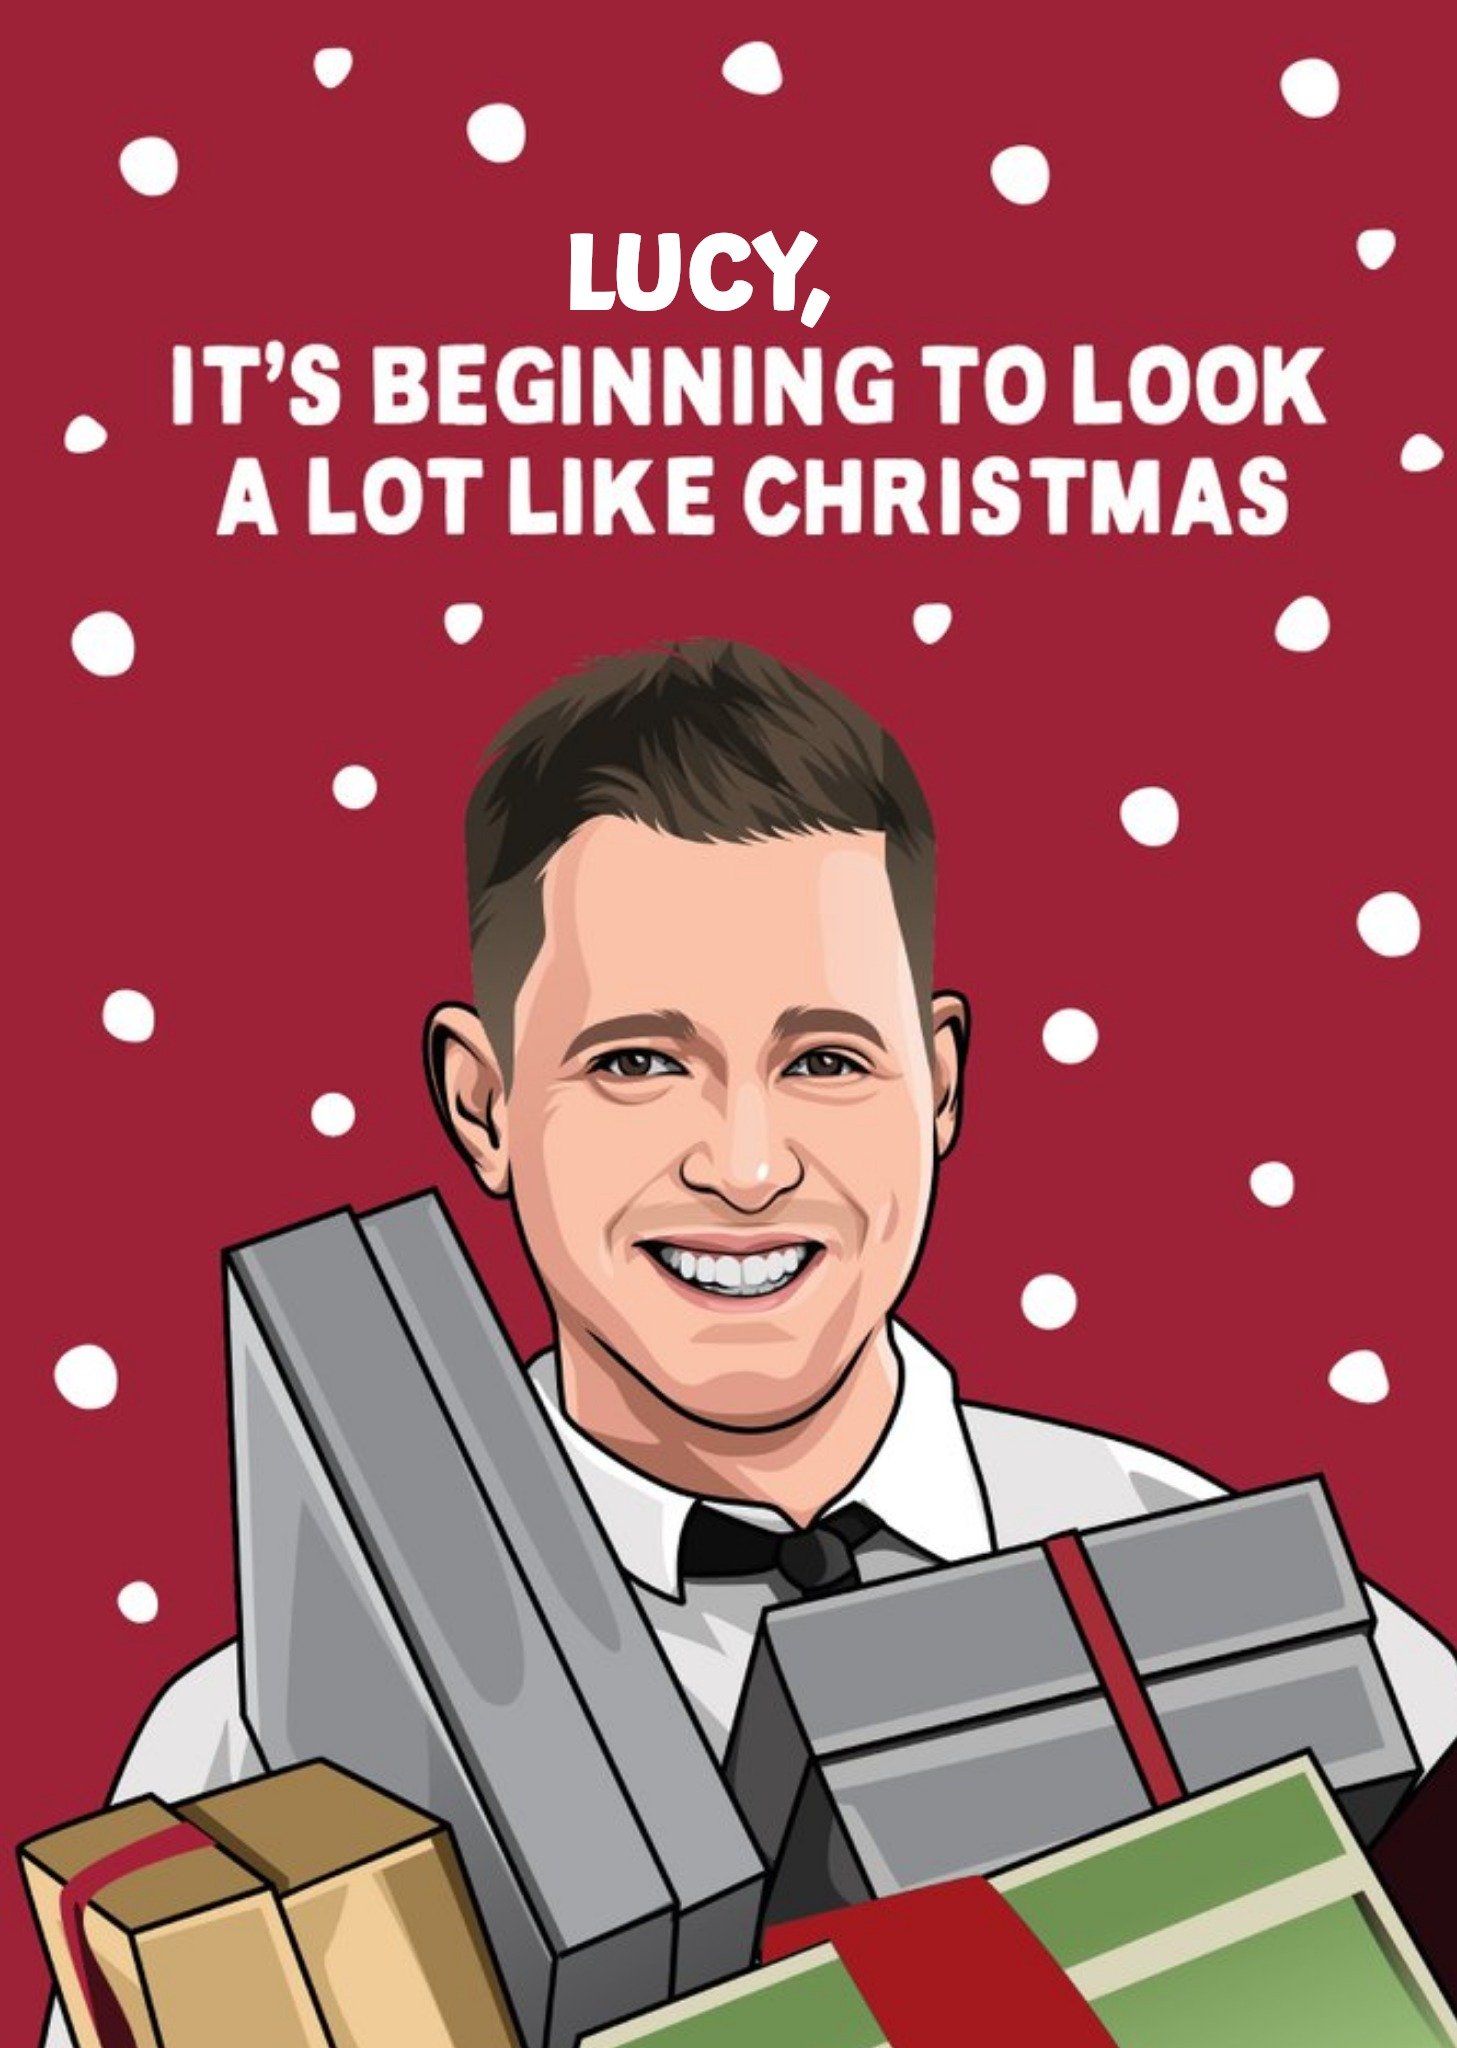 All Things Banter Funny Spoof Illustration It's Begging To Look A Lot Like Christmas Card Ecard